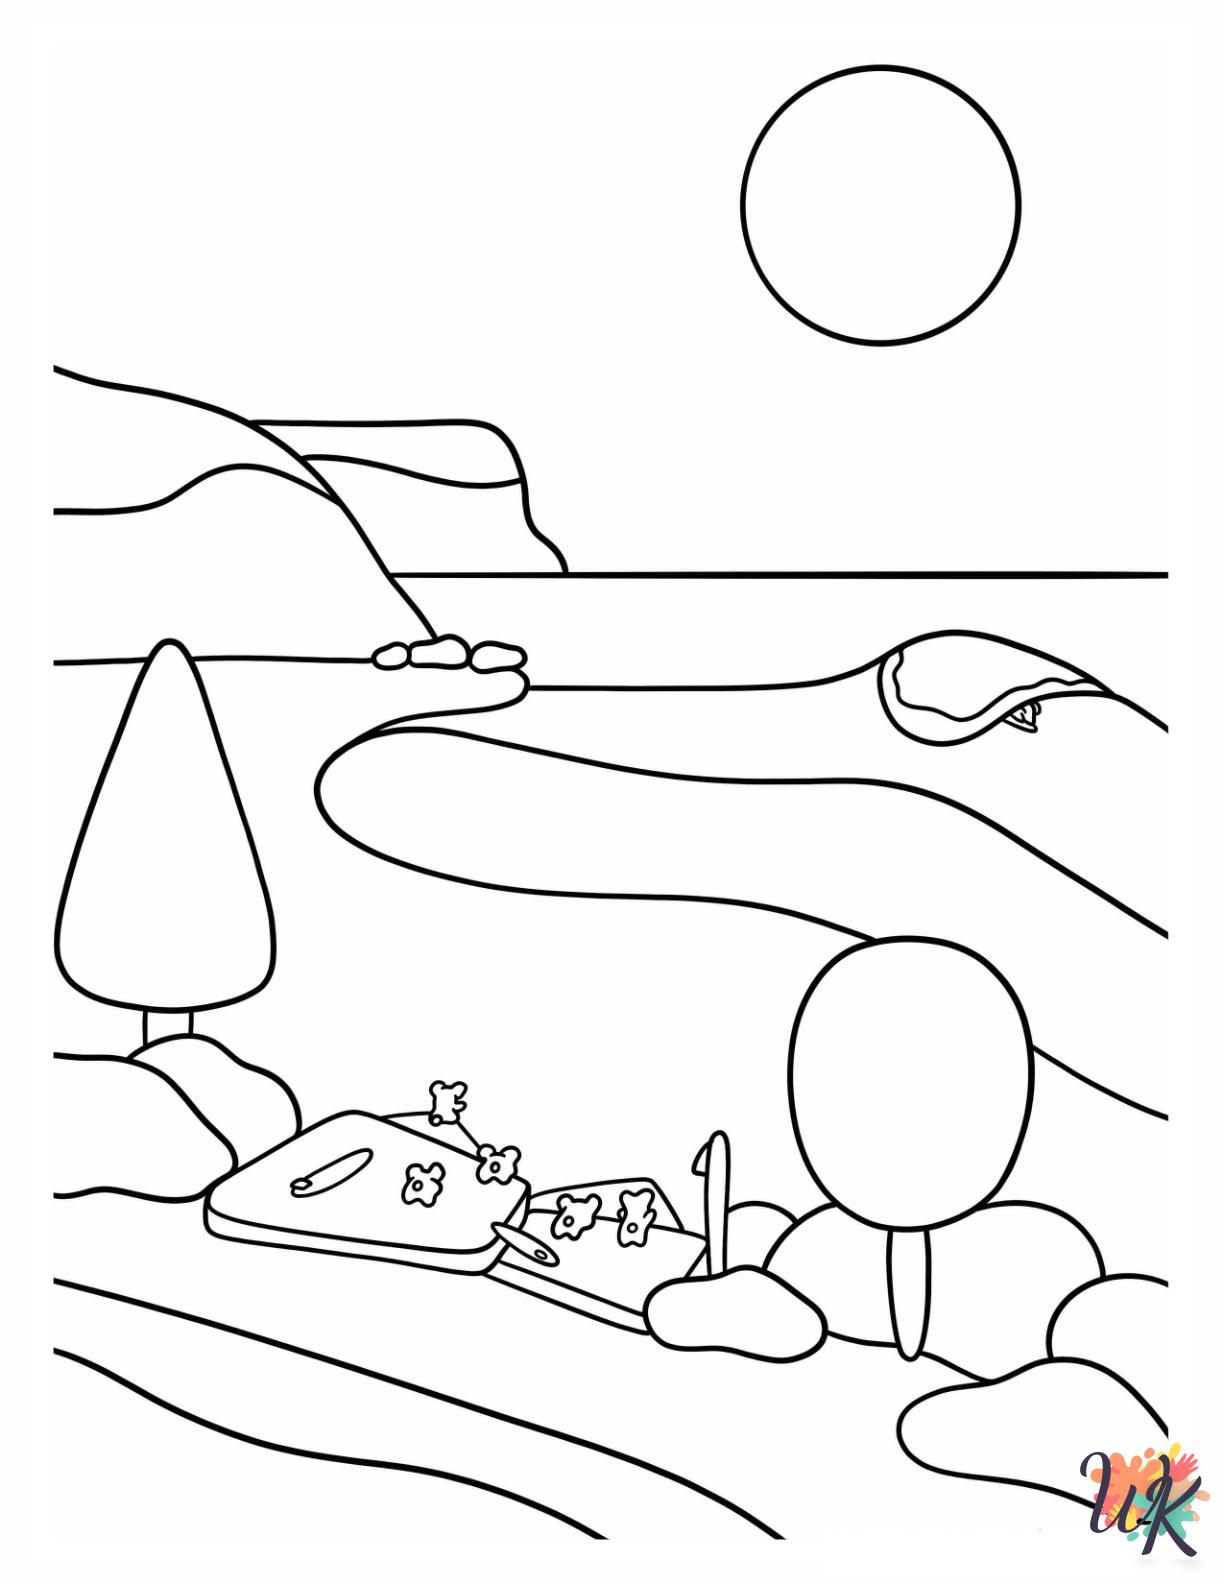 Aesthetic free coloring pages